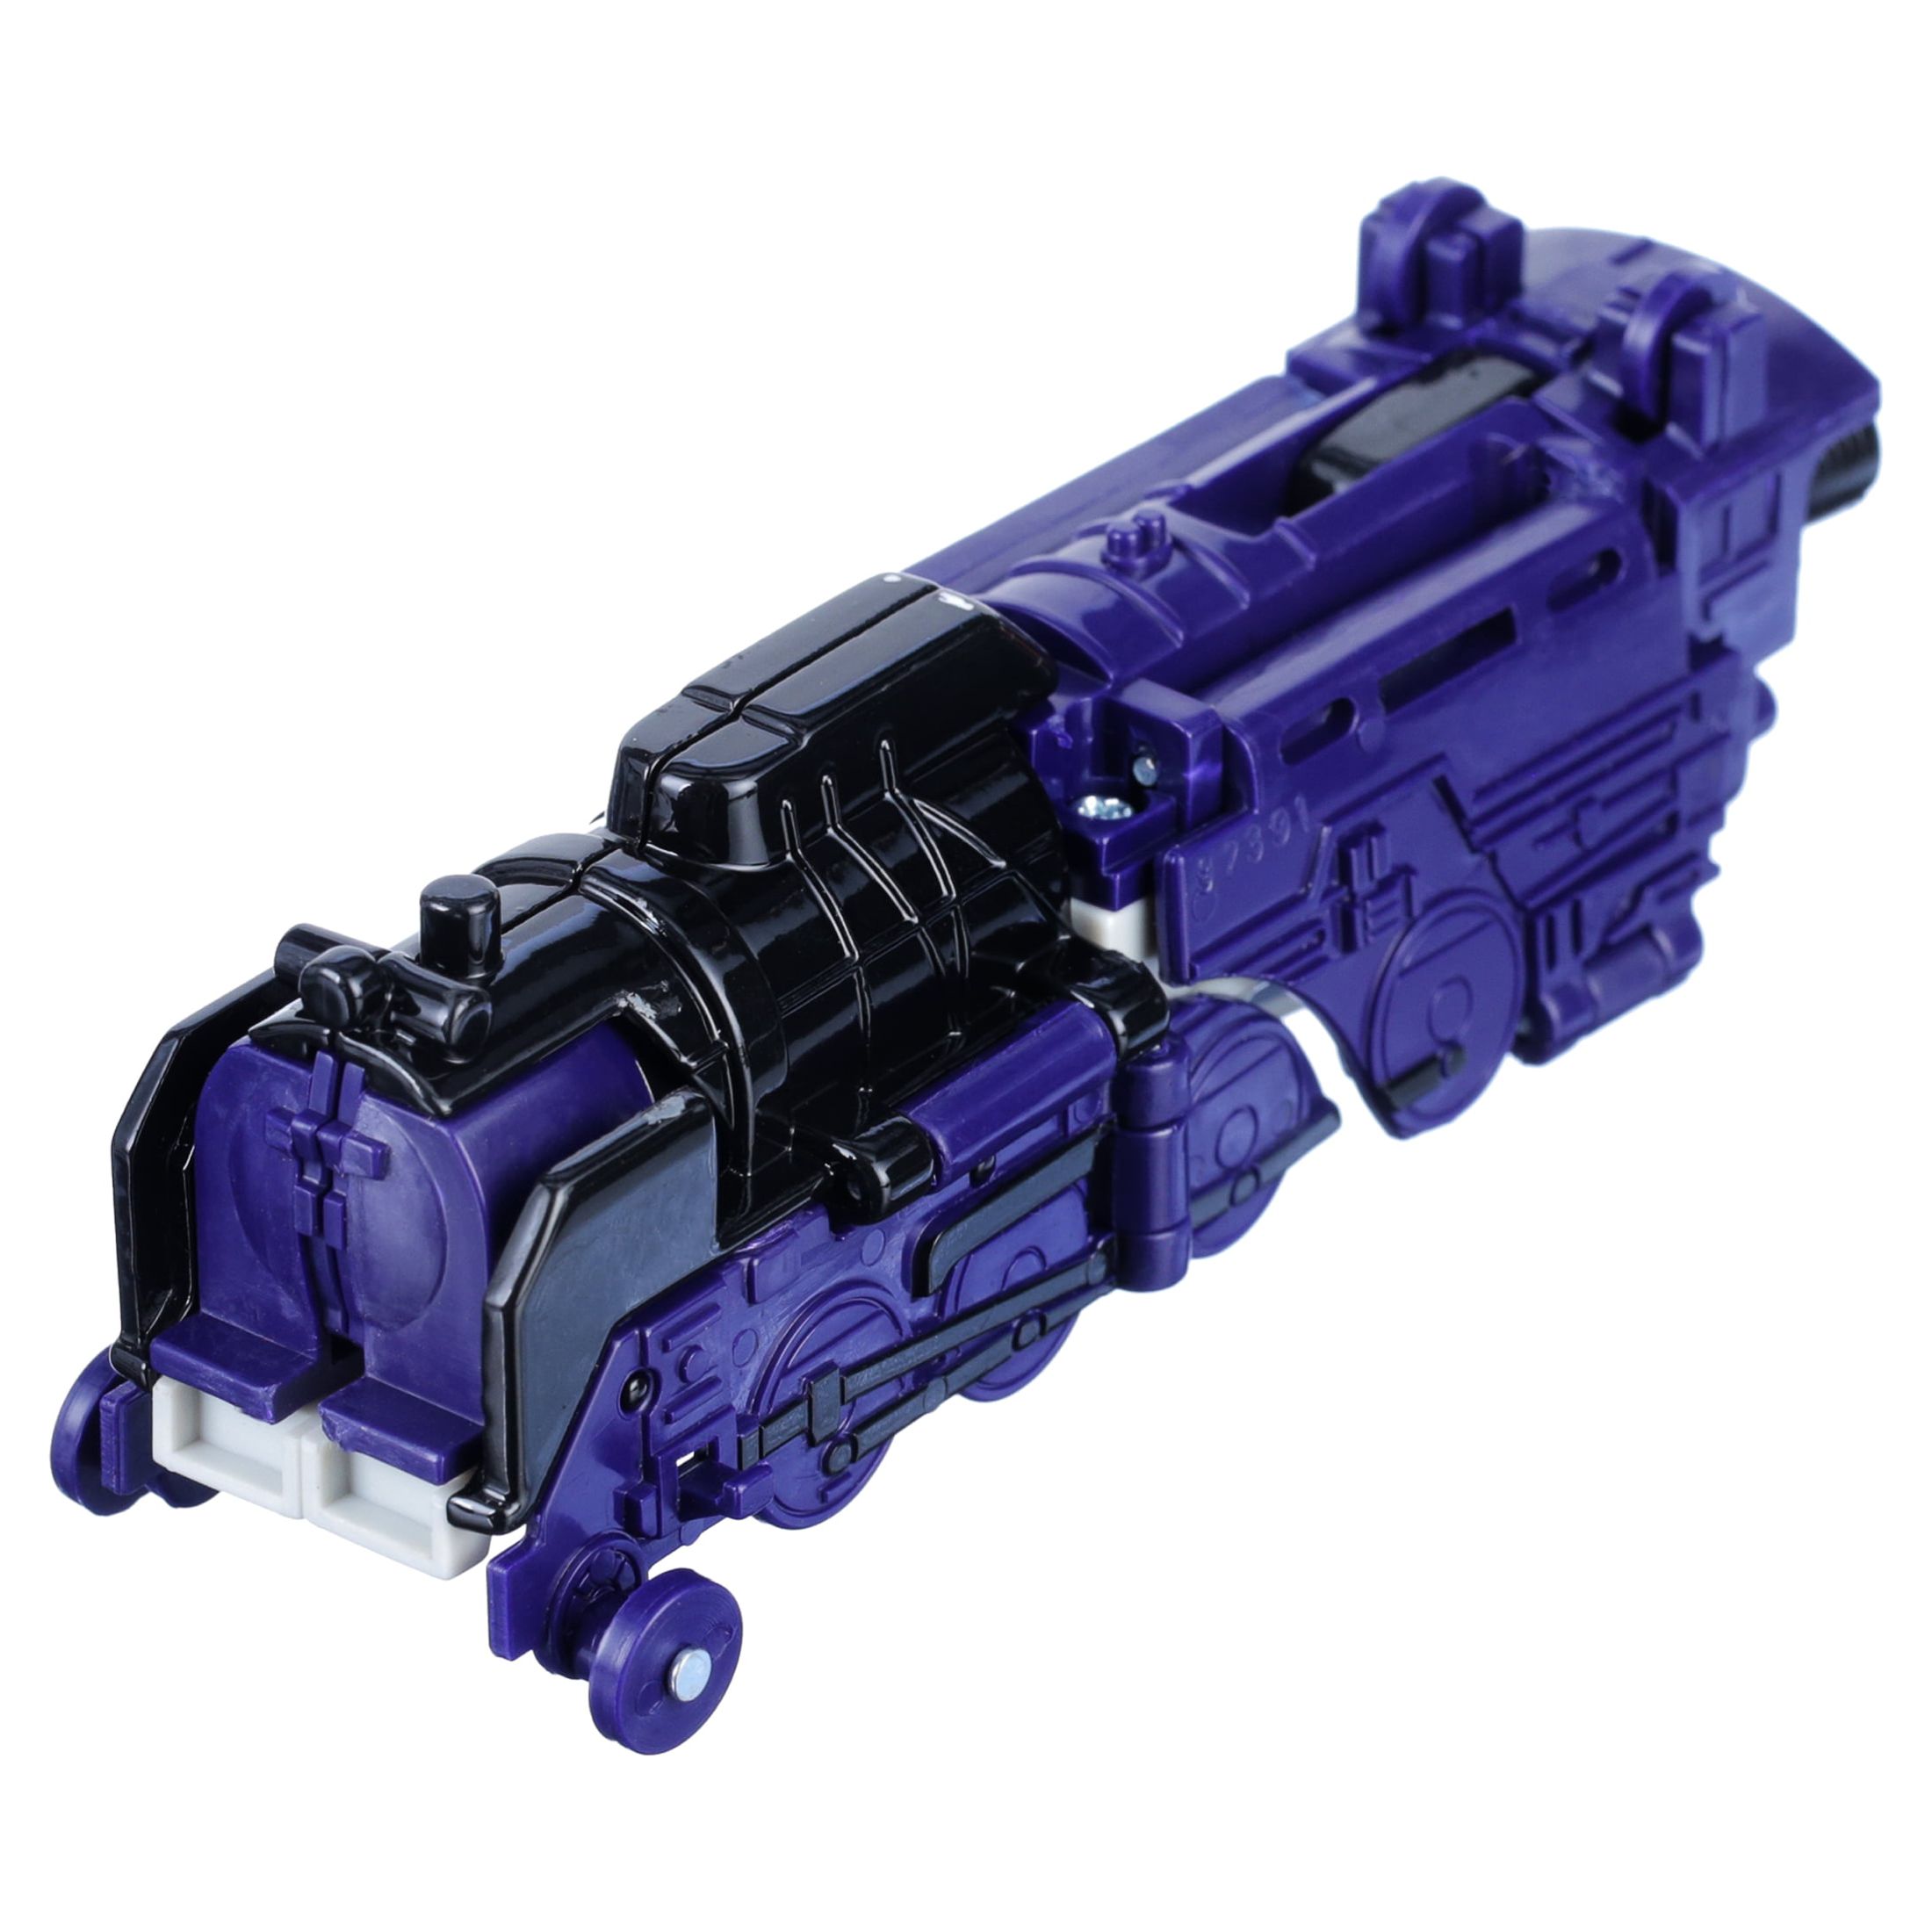 Transformers Toys Vintage G1 Astrotrain 4.5 Inch Action Figure Toy, Accessory - image 5 of 9